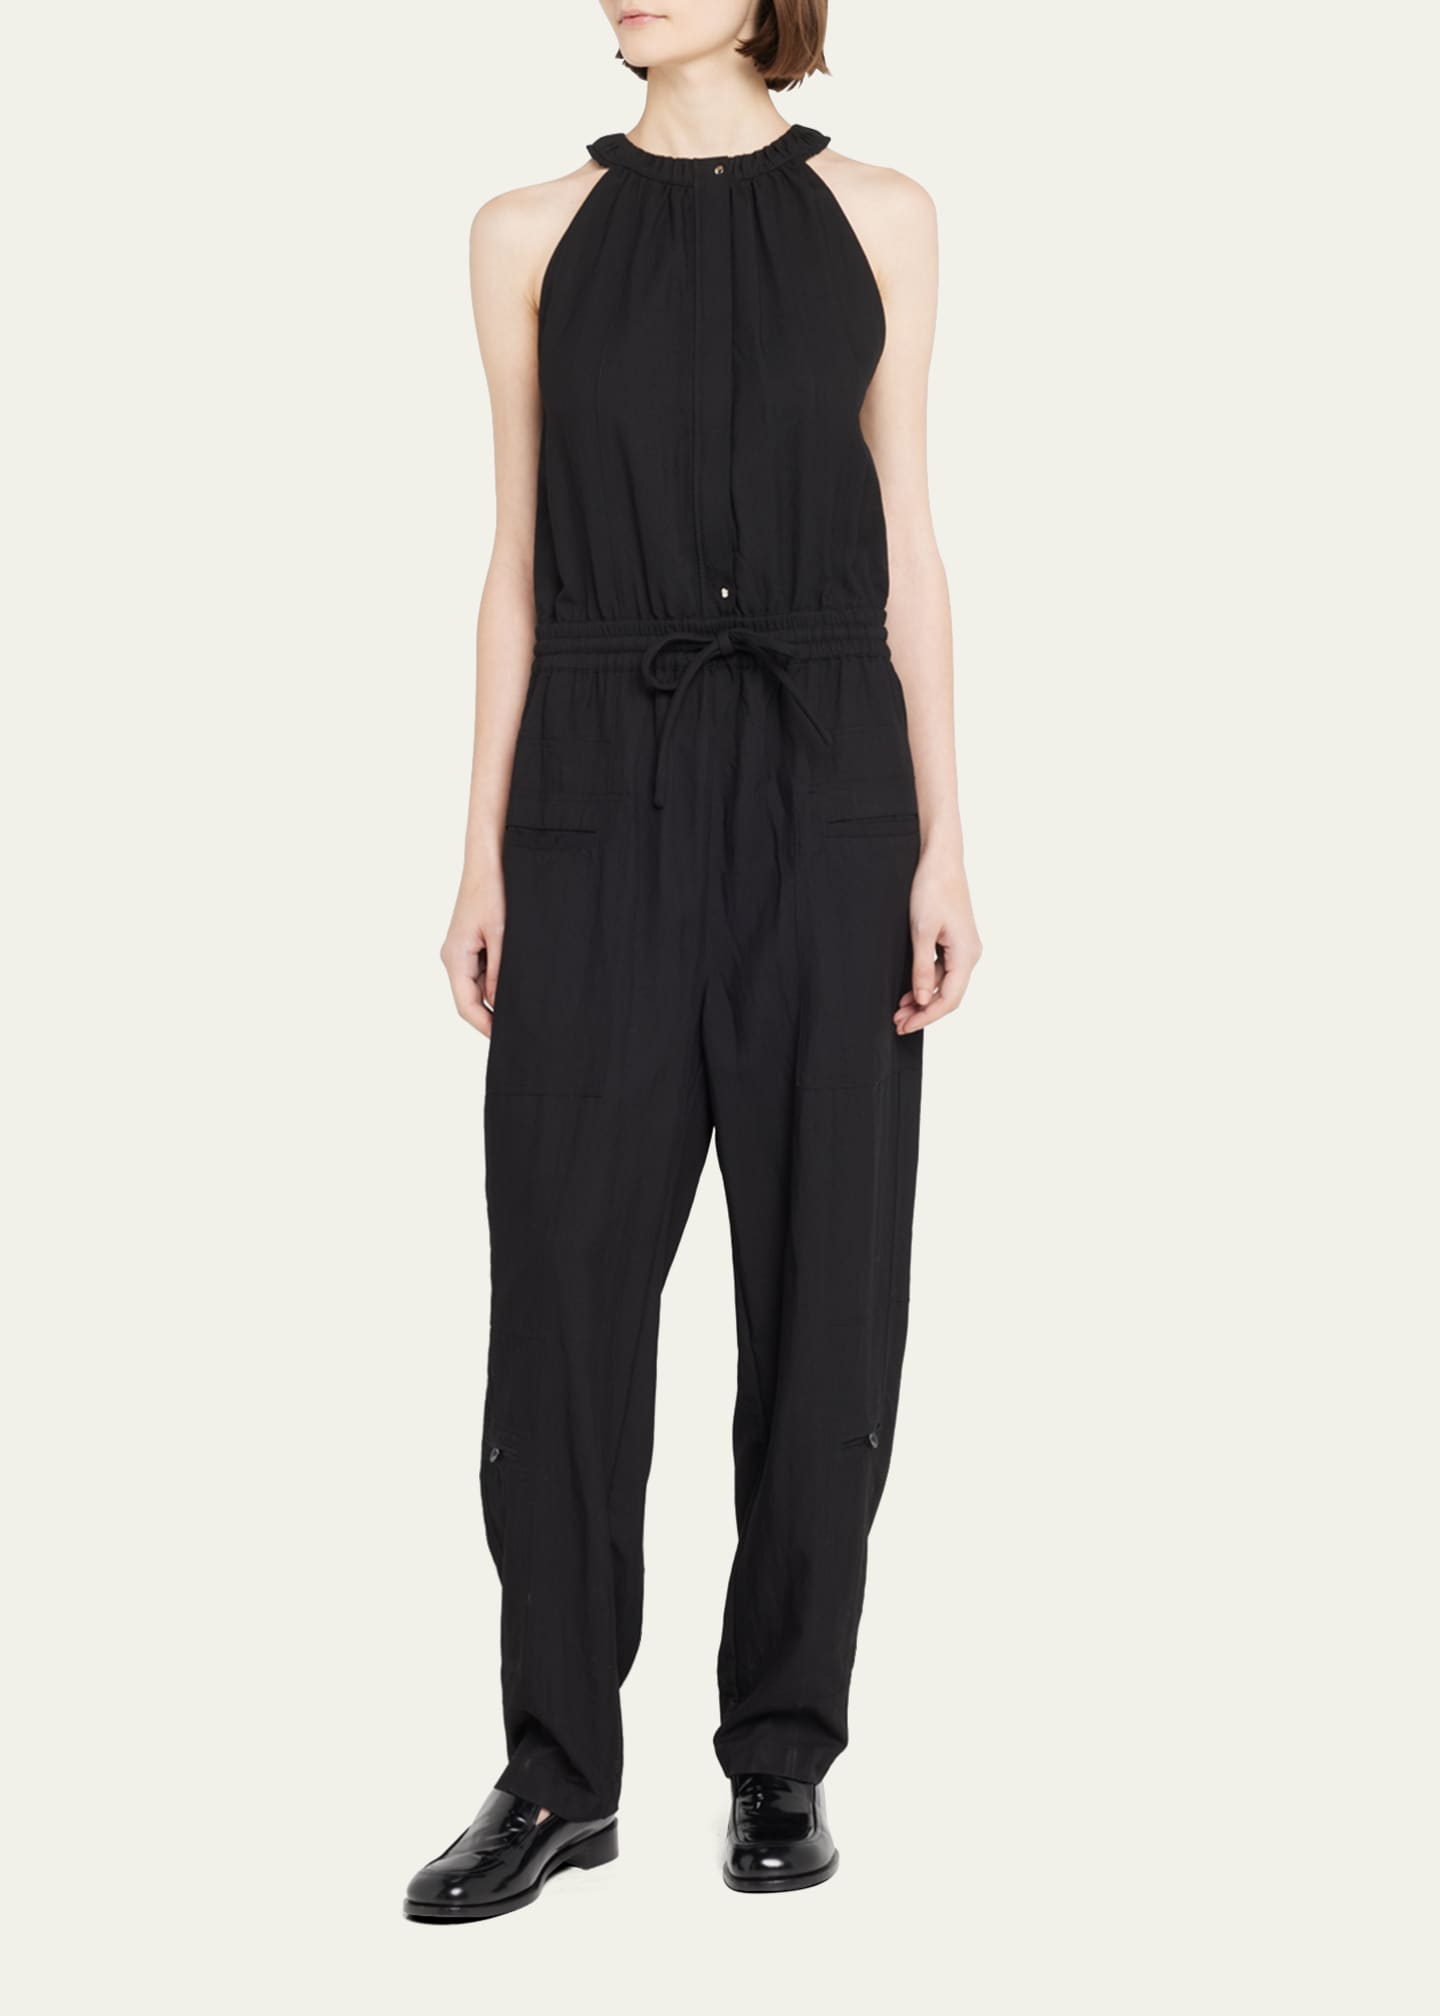 Proenza Schouler White Label Drapey Suiting Sleeveless Jumpsuit ...